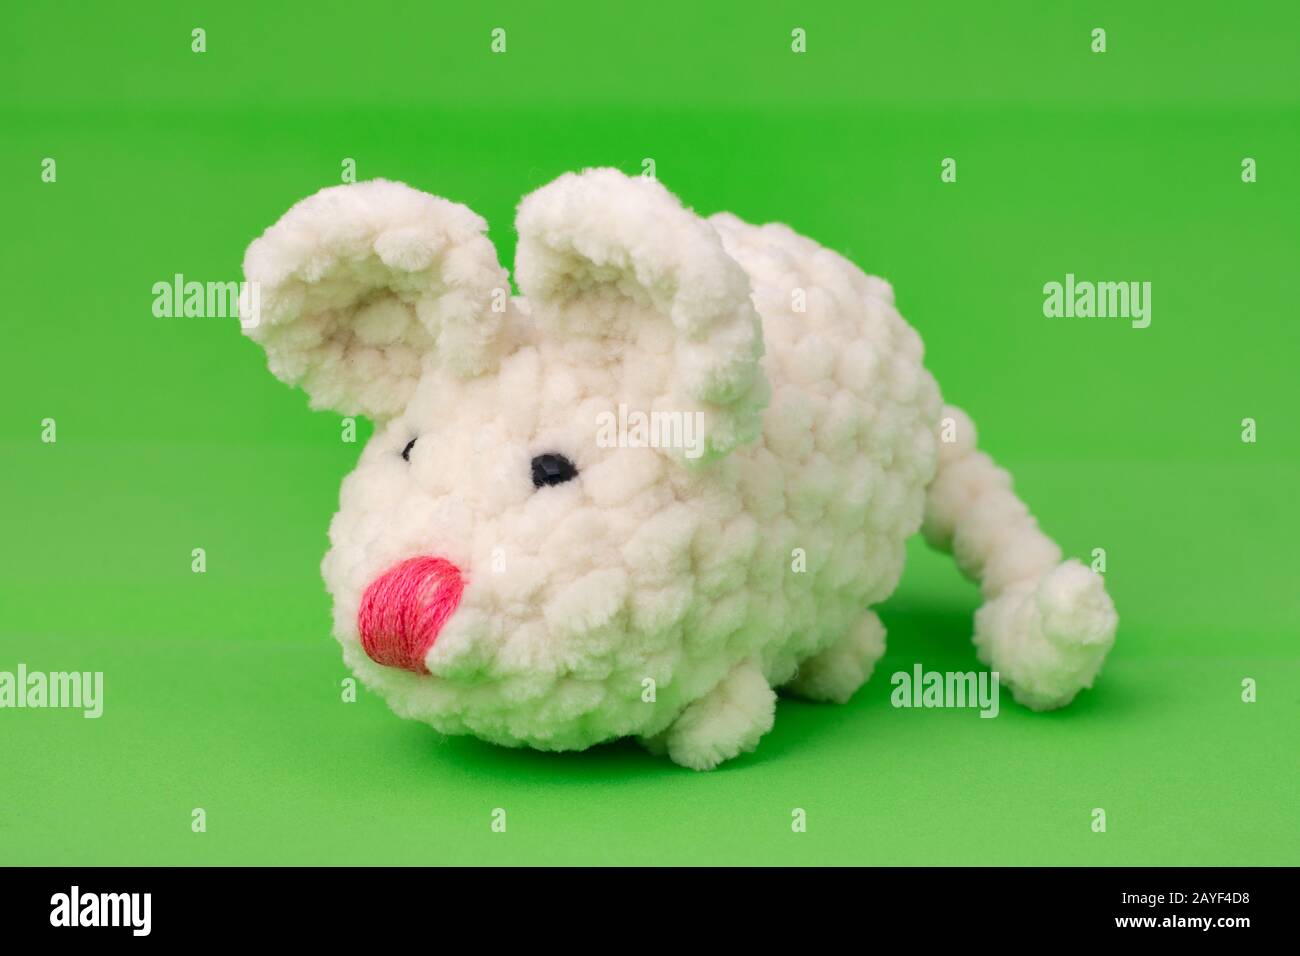 White knitted mouse, made with its own hands, on a green background Stock Photo